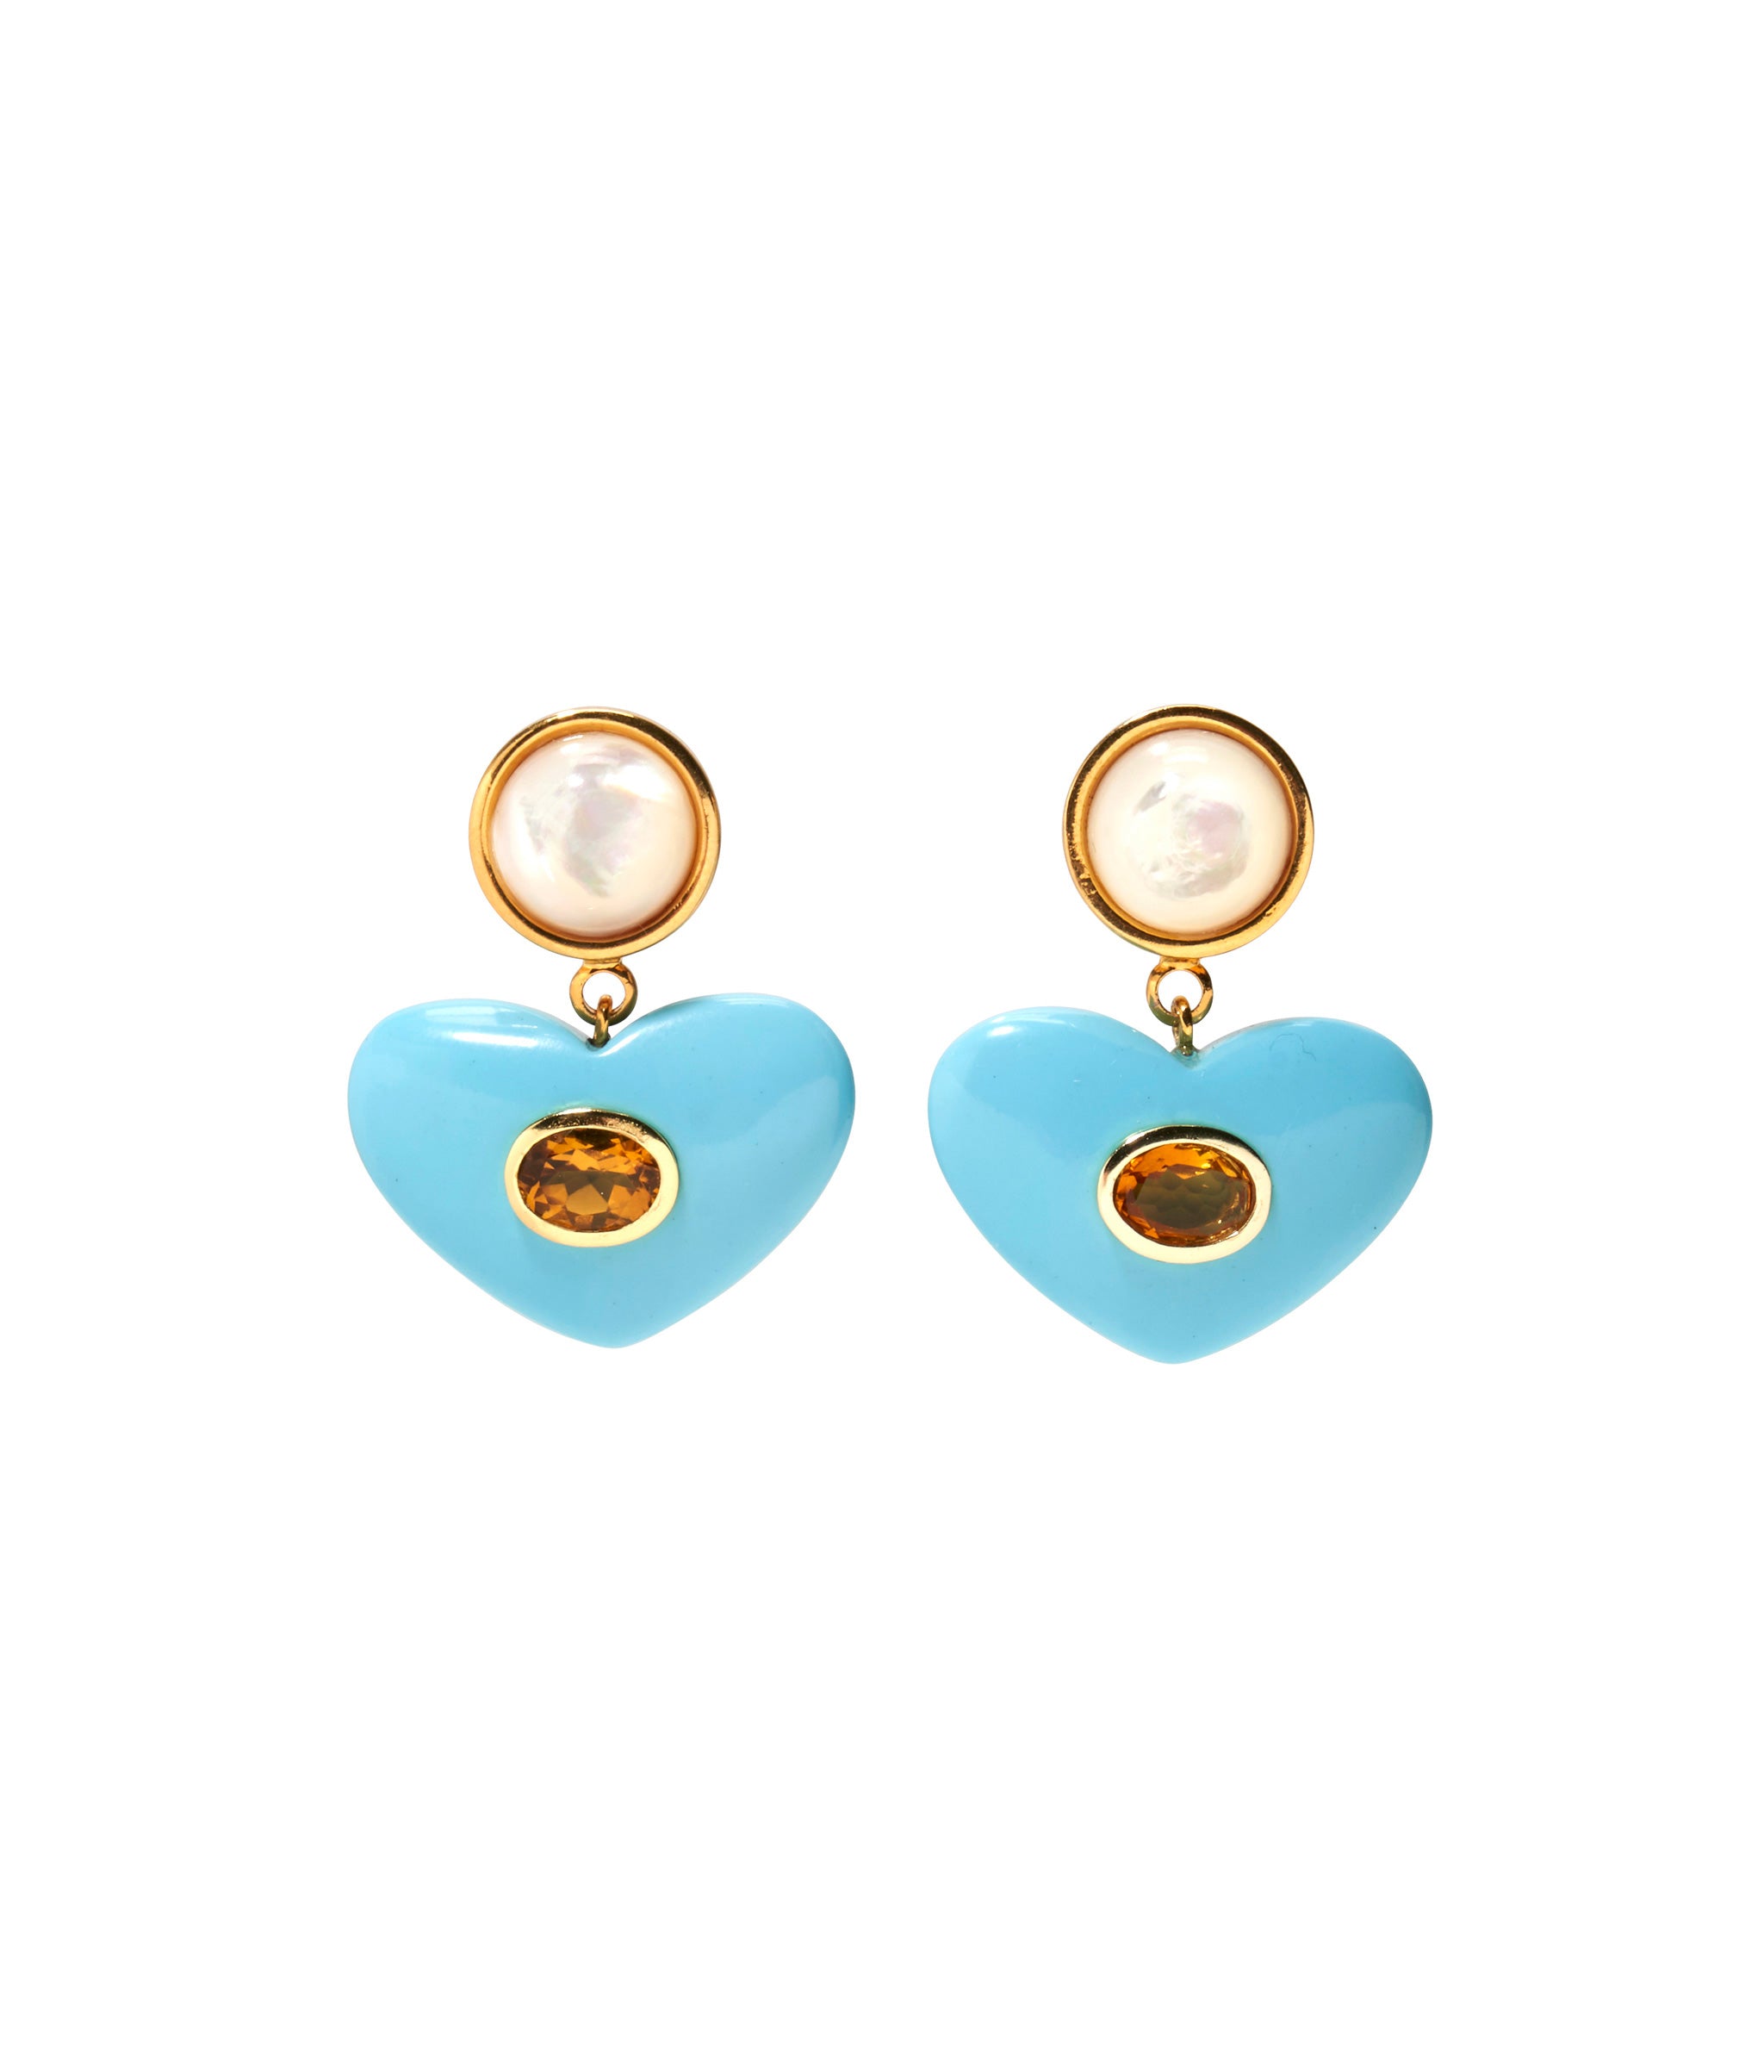 Enamored Earrings in Turquoise. Mother-of-pearl tops with turquoise-colored heart drops and dark citrine stones.